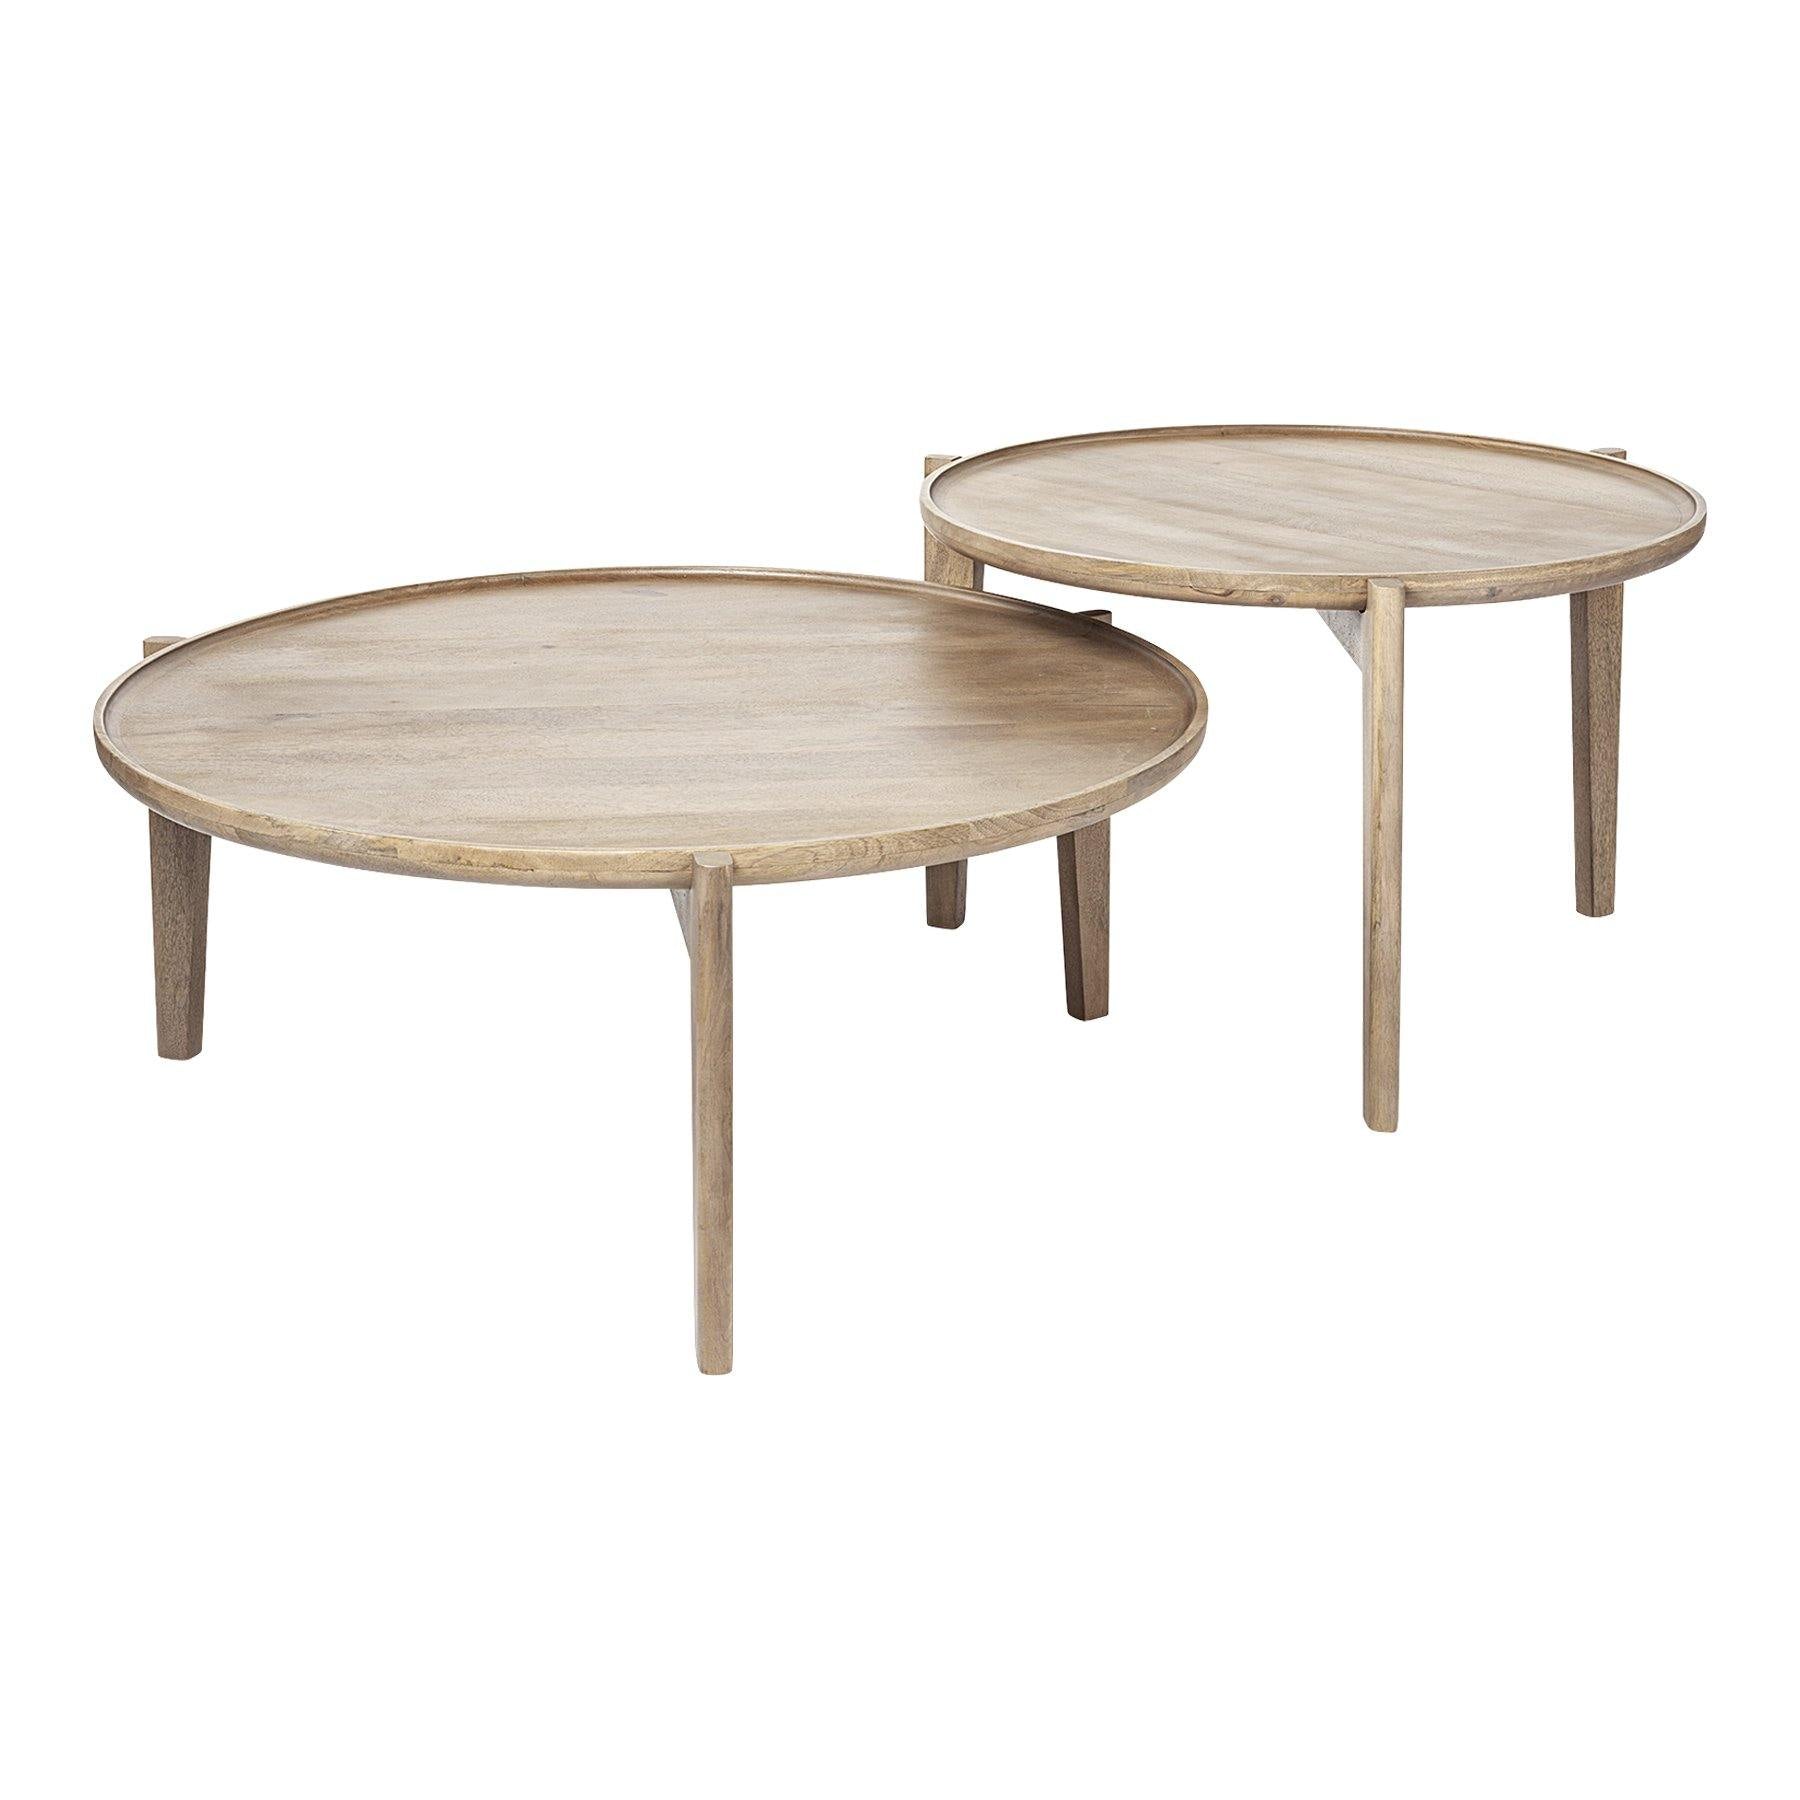 Cleaver Nesting Coffee Tables - Reimagine Designs - coffee table